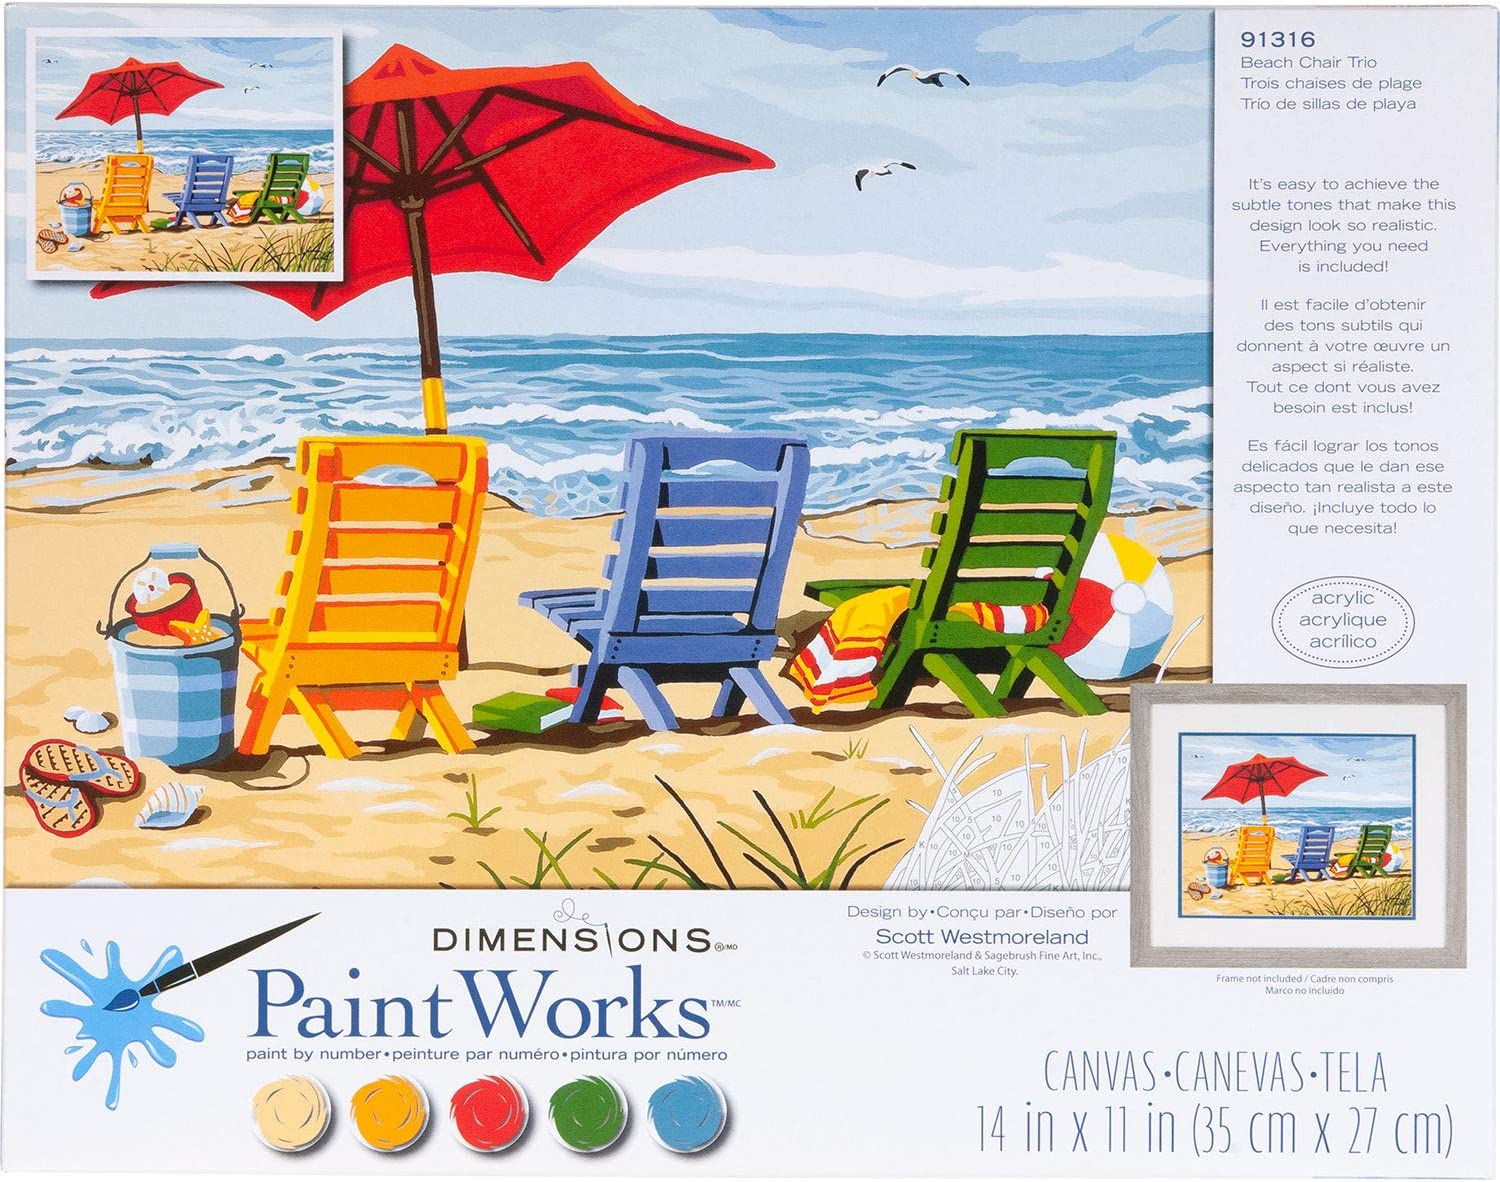 PaintWorks - Paint by Numbers - Beach Chair Trio | Event Horizon Hobbies CA